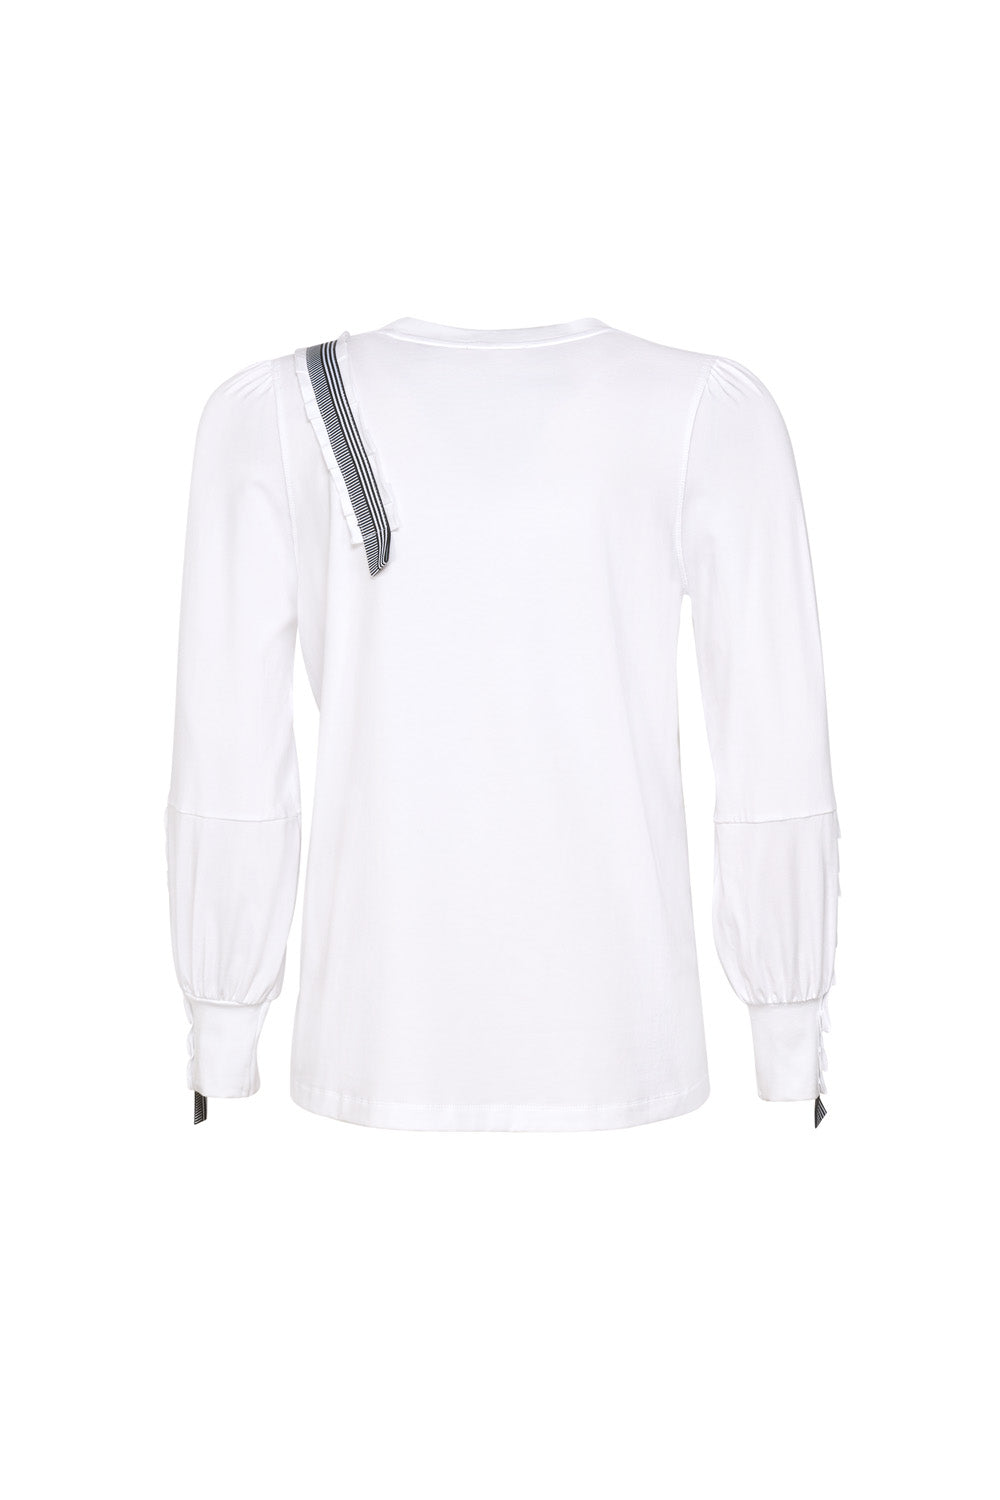 MADLY SWEETLY MIXED MEDIA TOP - WHITE - THE VOGUE STORE